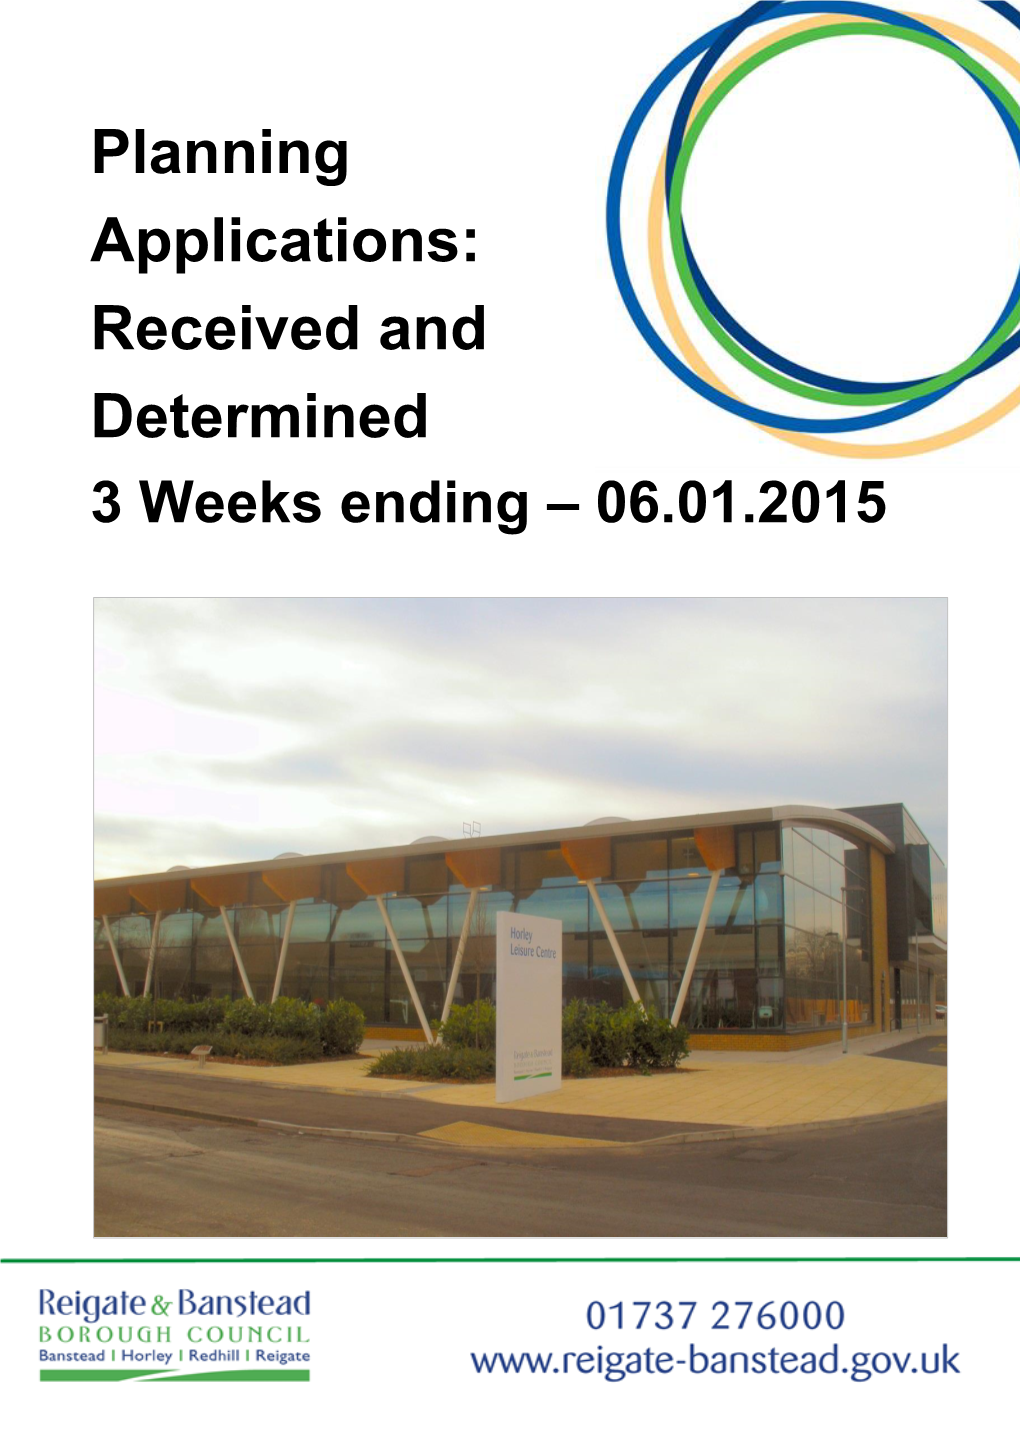 Planning Applications: Received and Determined